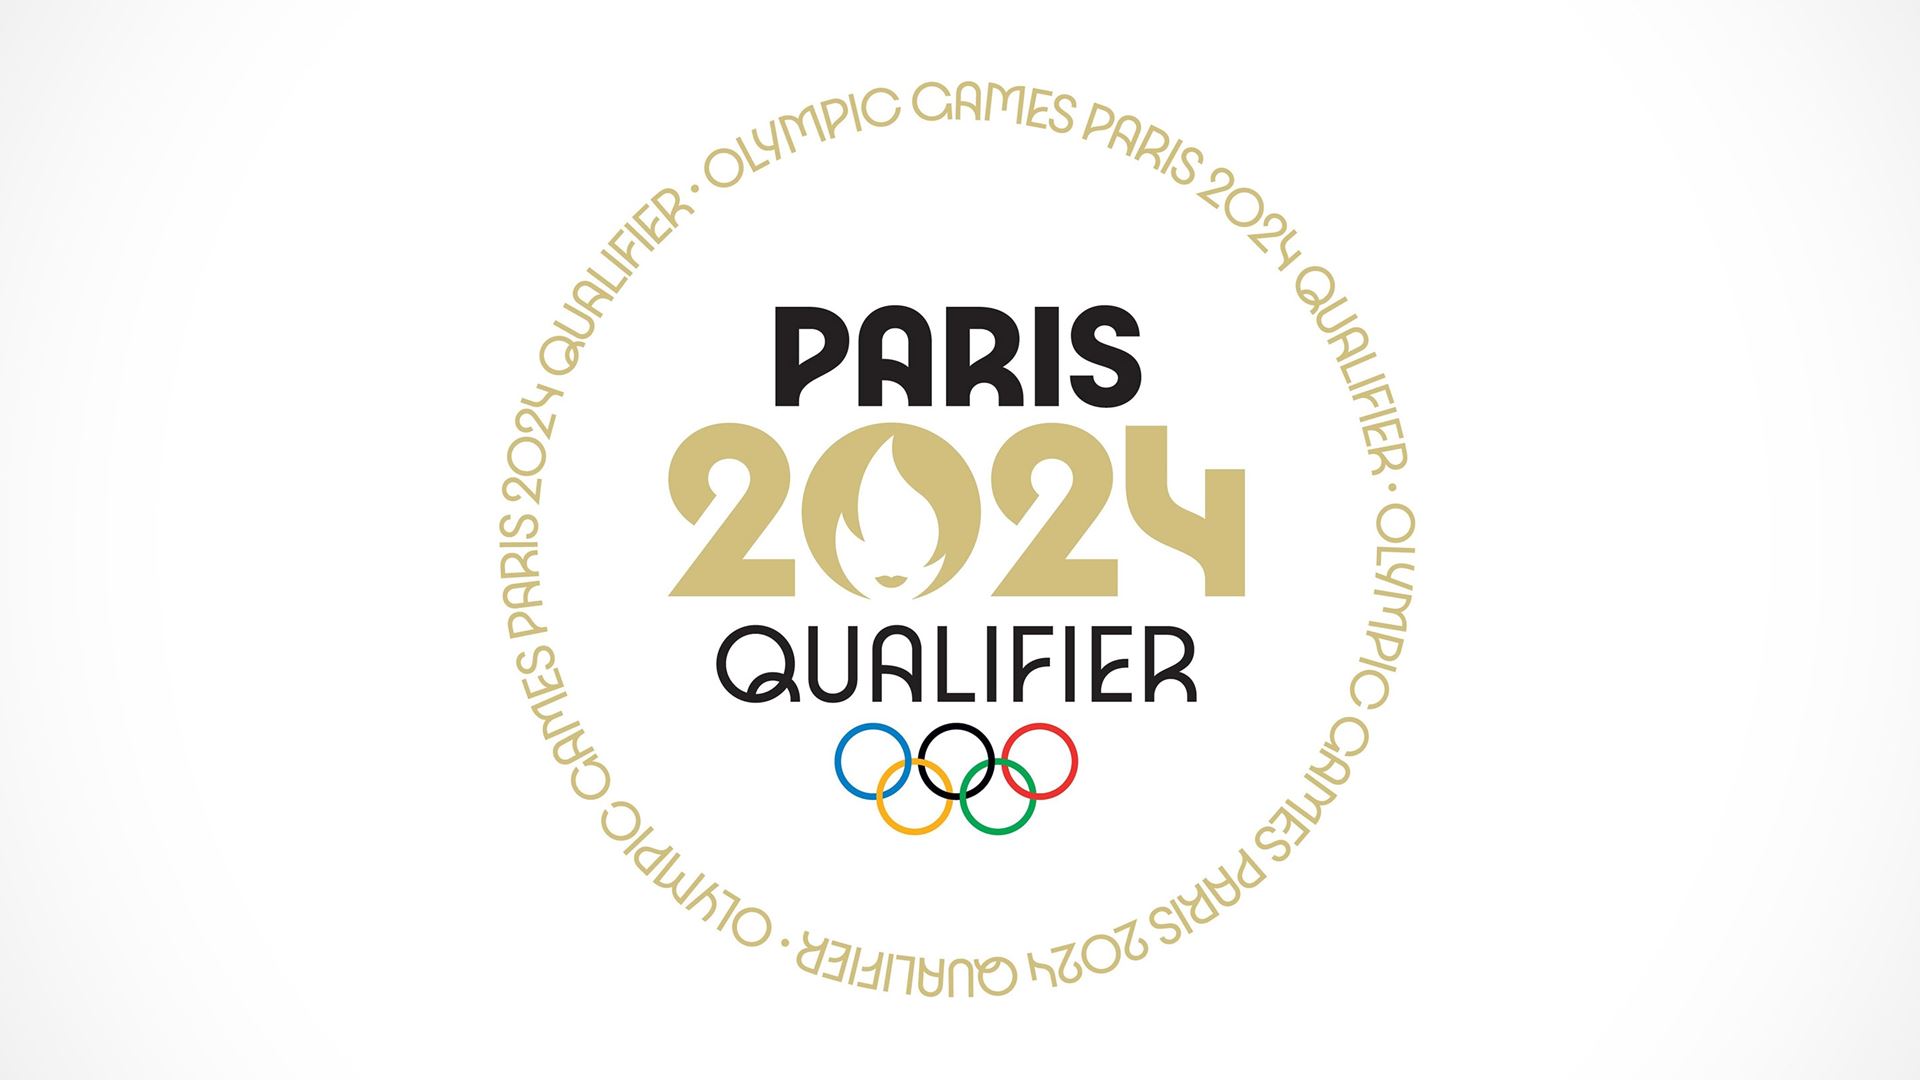 Excitement builds for Paris 2024 as Olympic qualifiers get underway